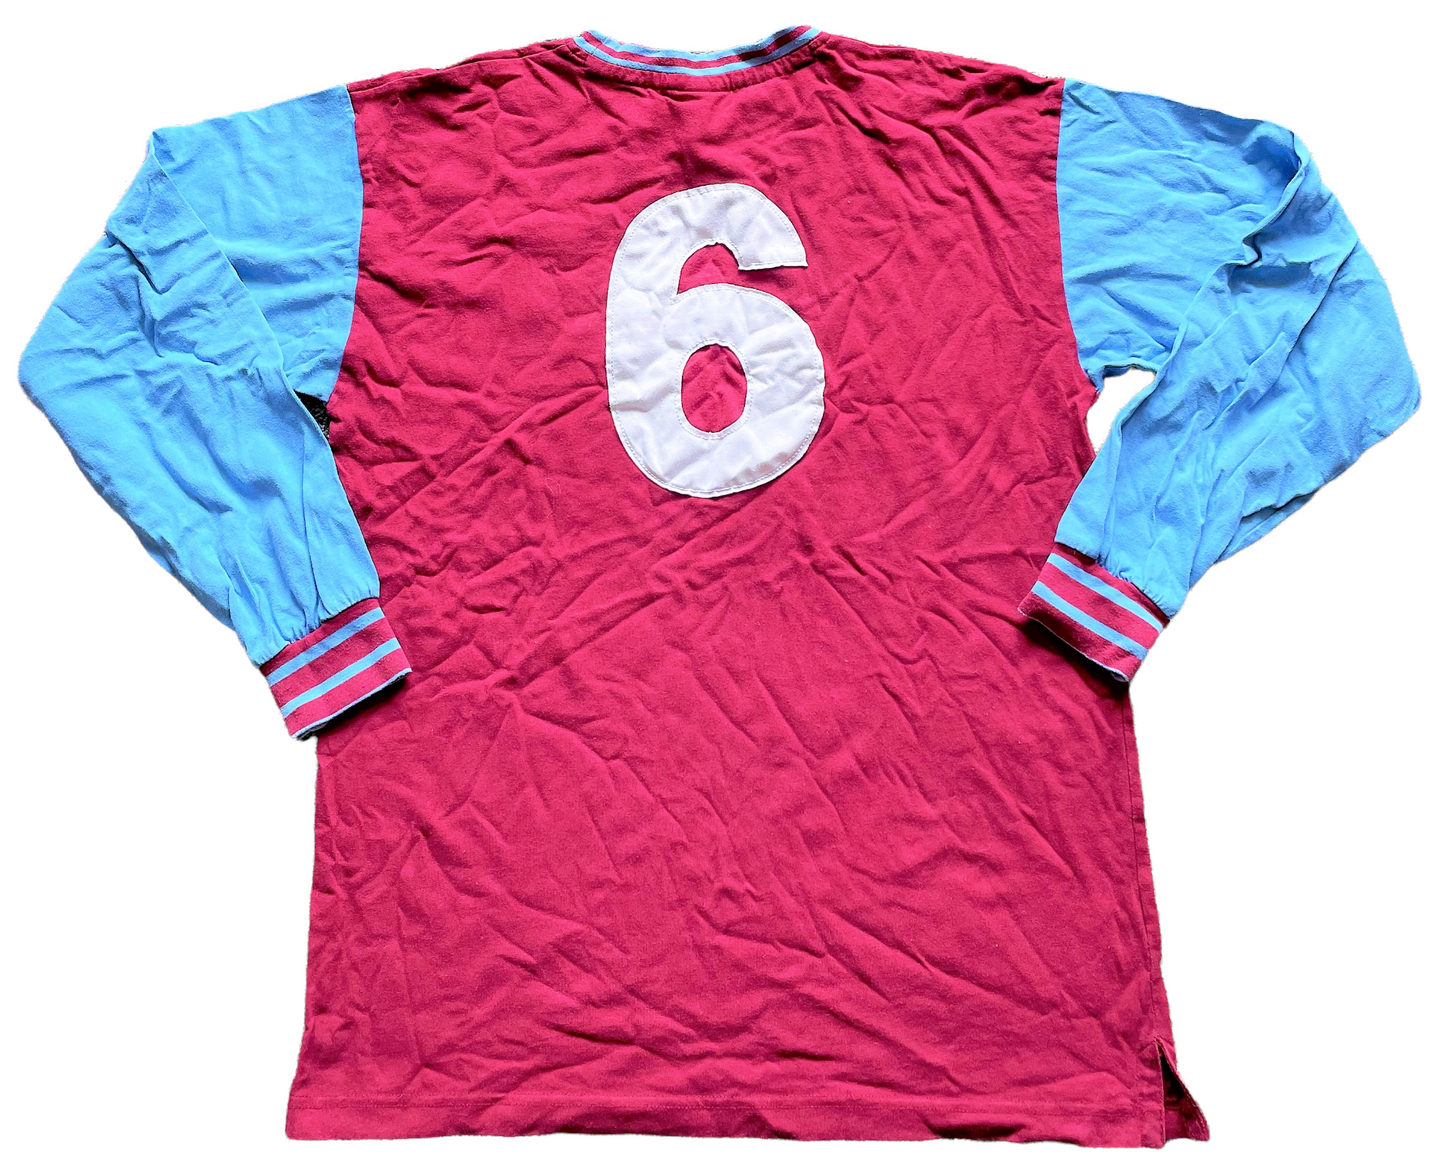 West Ham 1963 Home Shirt Remake (excellent) Adults Large -more like Small. Height 25 inches